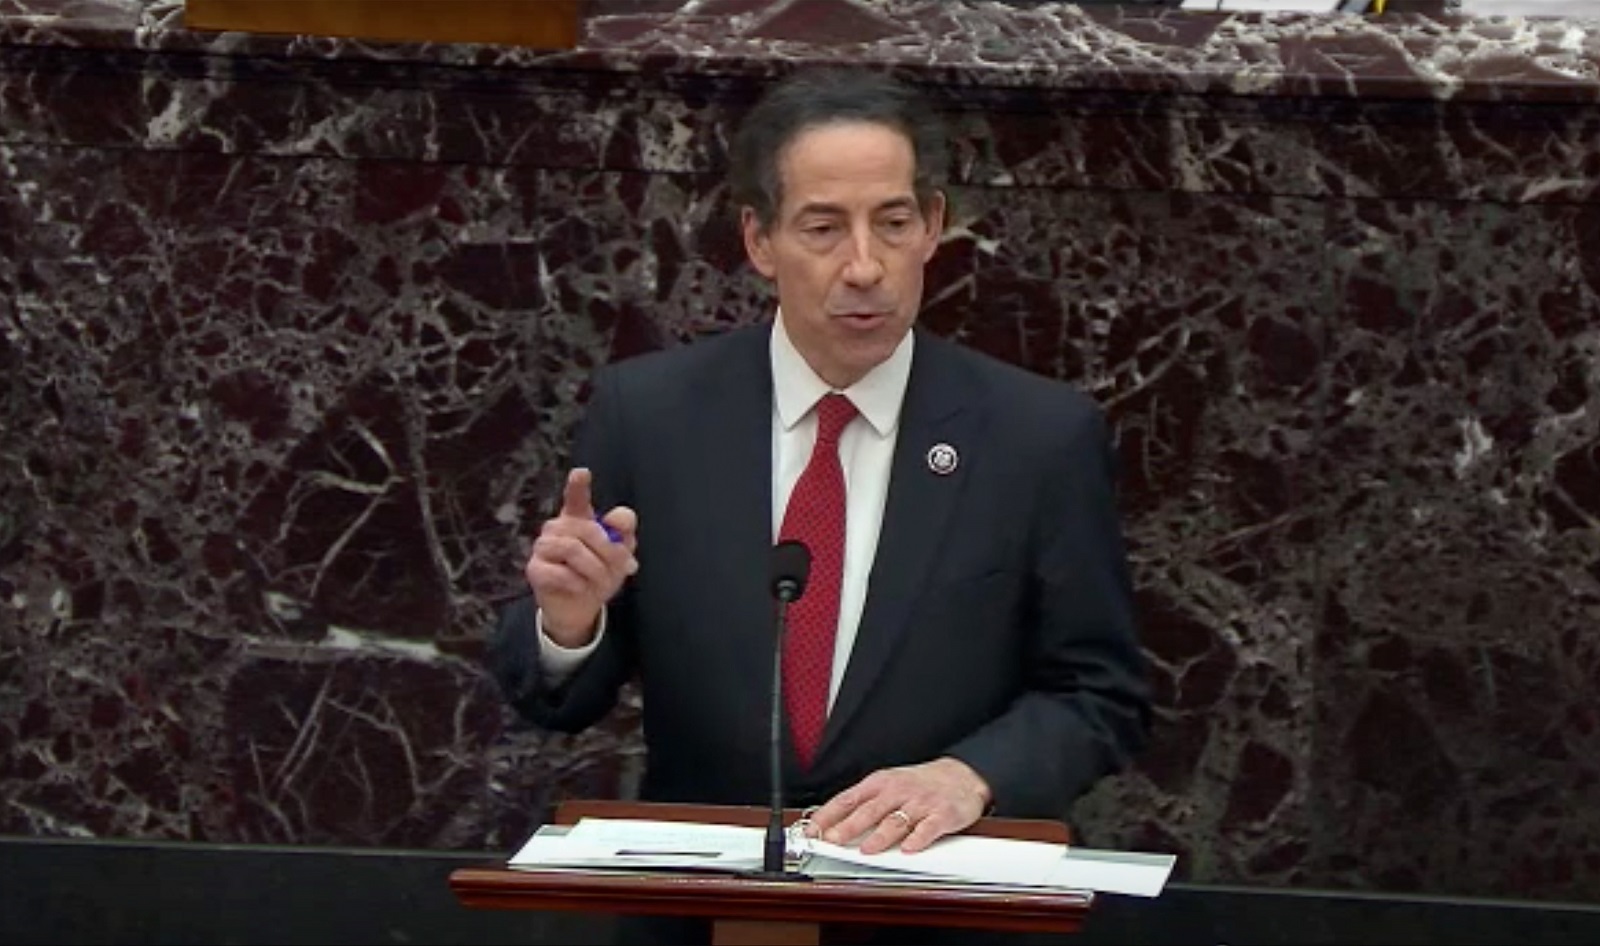 epa08999429 A screen grab from a live broadcast by the Sebate TV showing Representative Jamie Raskin, Manager on the Part of the House, addresses the US Congress during the second impeachment Trial of Former US President Donald J. Trump inside the US Capitol in Washington DC USA 09 February 2021. The second senate impeachment trial of former US President Donald J. Trump began today on charges of incitement of insurrection for his role in 06 January violent attack on the US Capitol.  EPA/SENATE TELEVSION HANDOUT  HANDOUT EDITORIAL USE ONLY/NO SALES